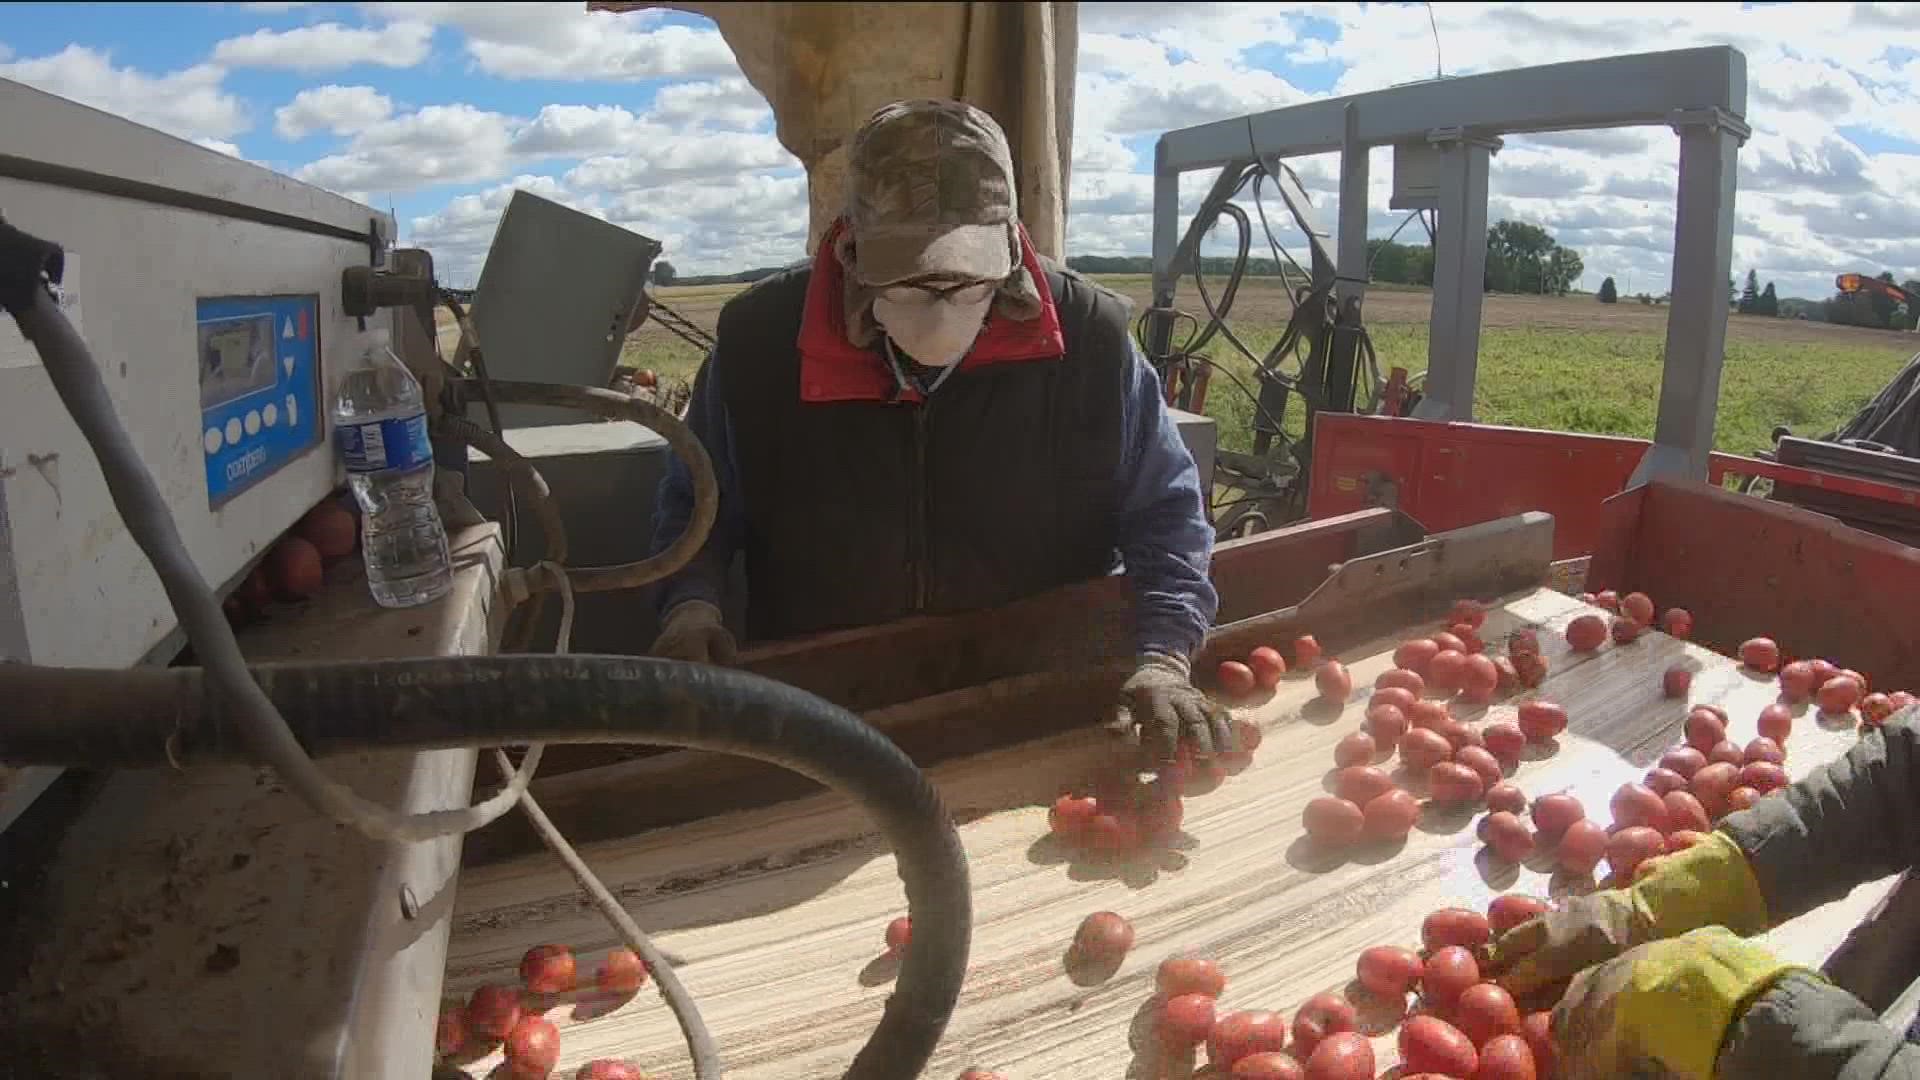 Triple H Farm usually gets about 30 tons of tomatoes per season. But this year, Owner Tommy Herr said they've had 40 tons.